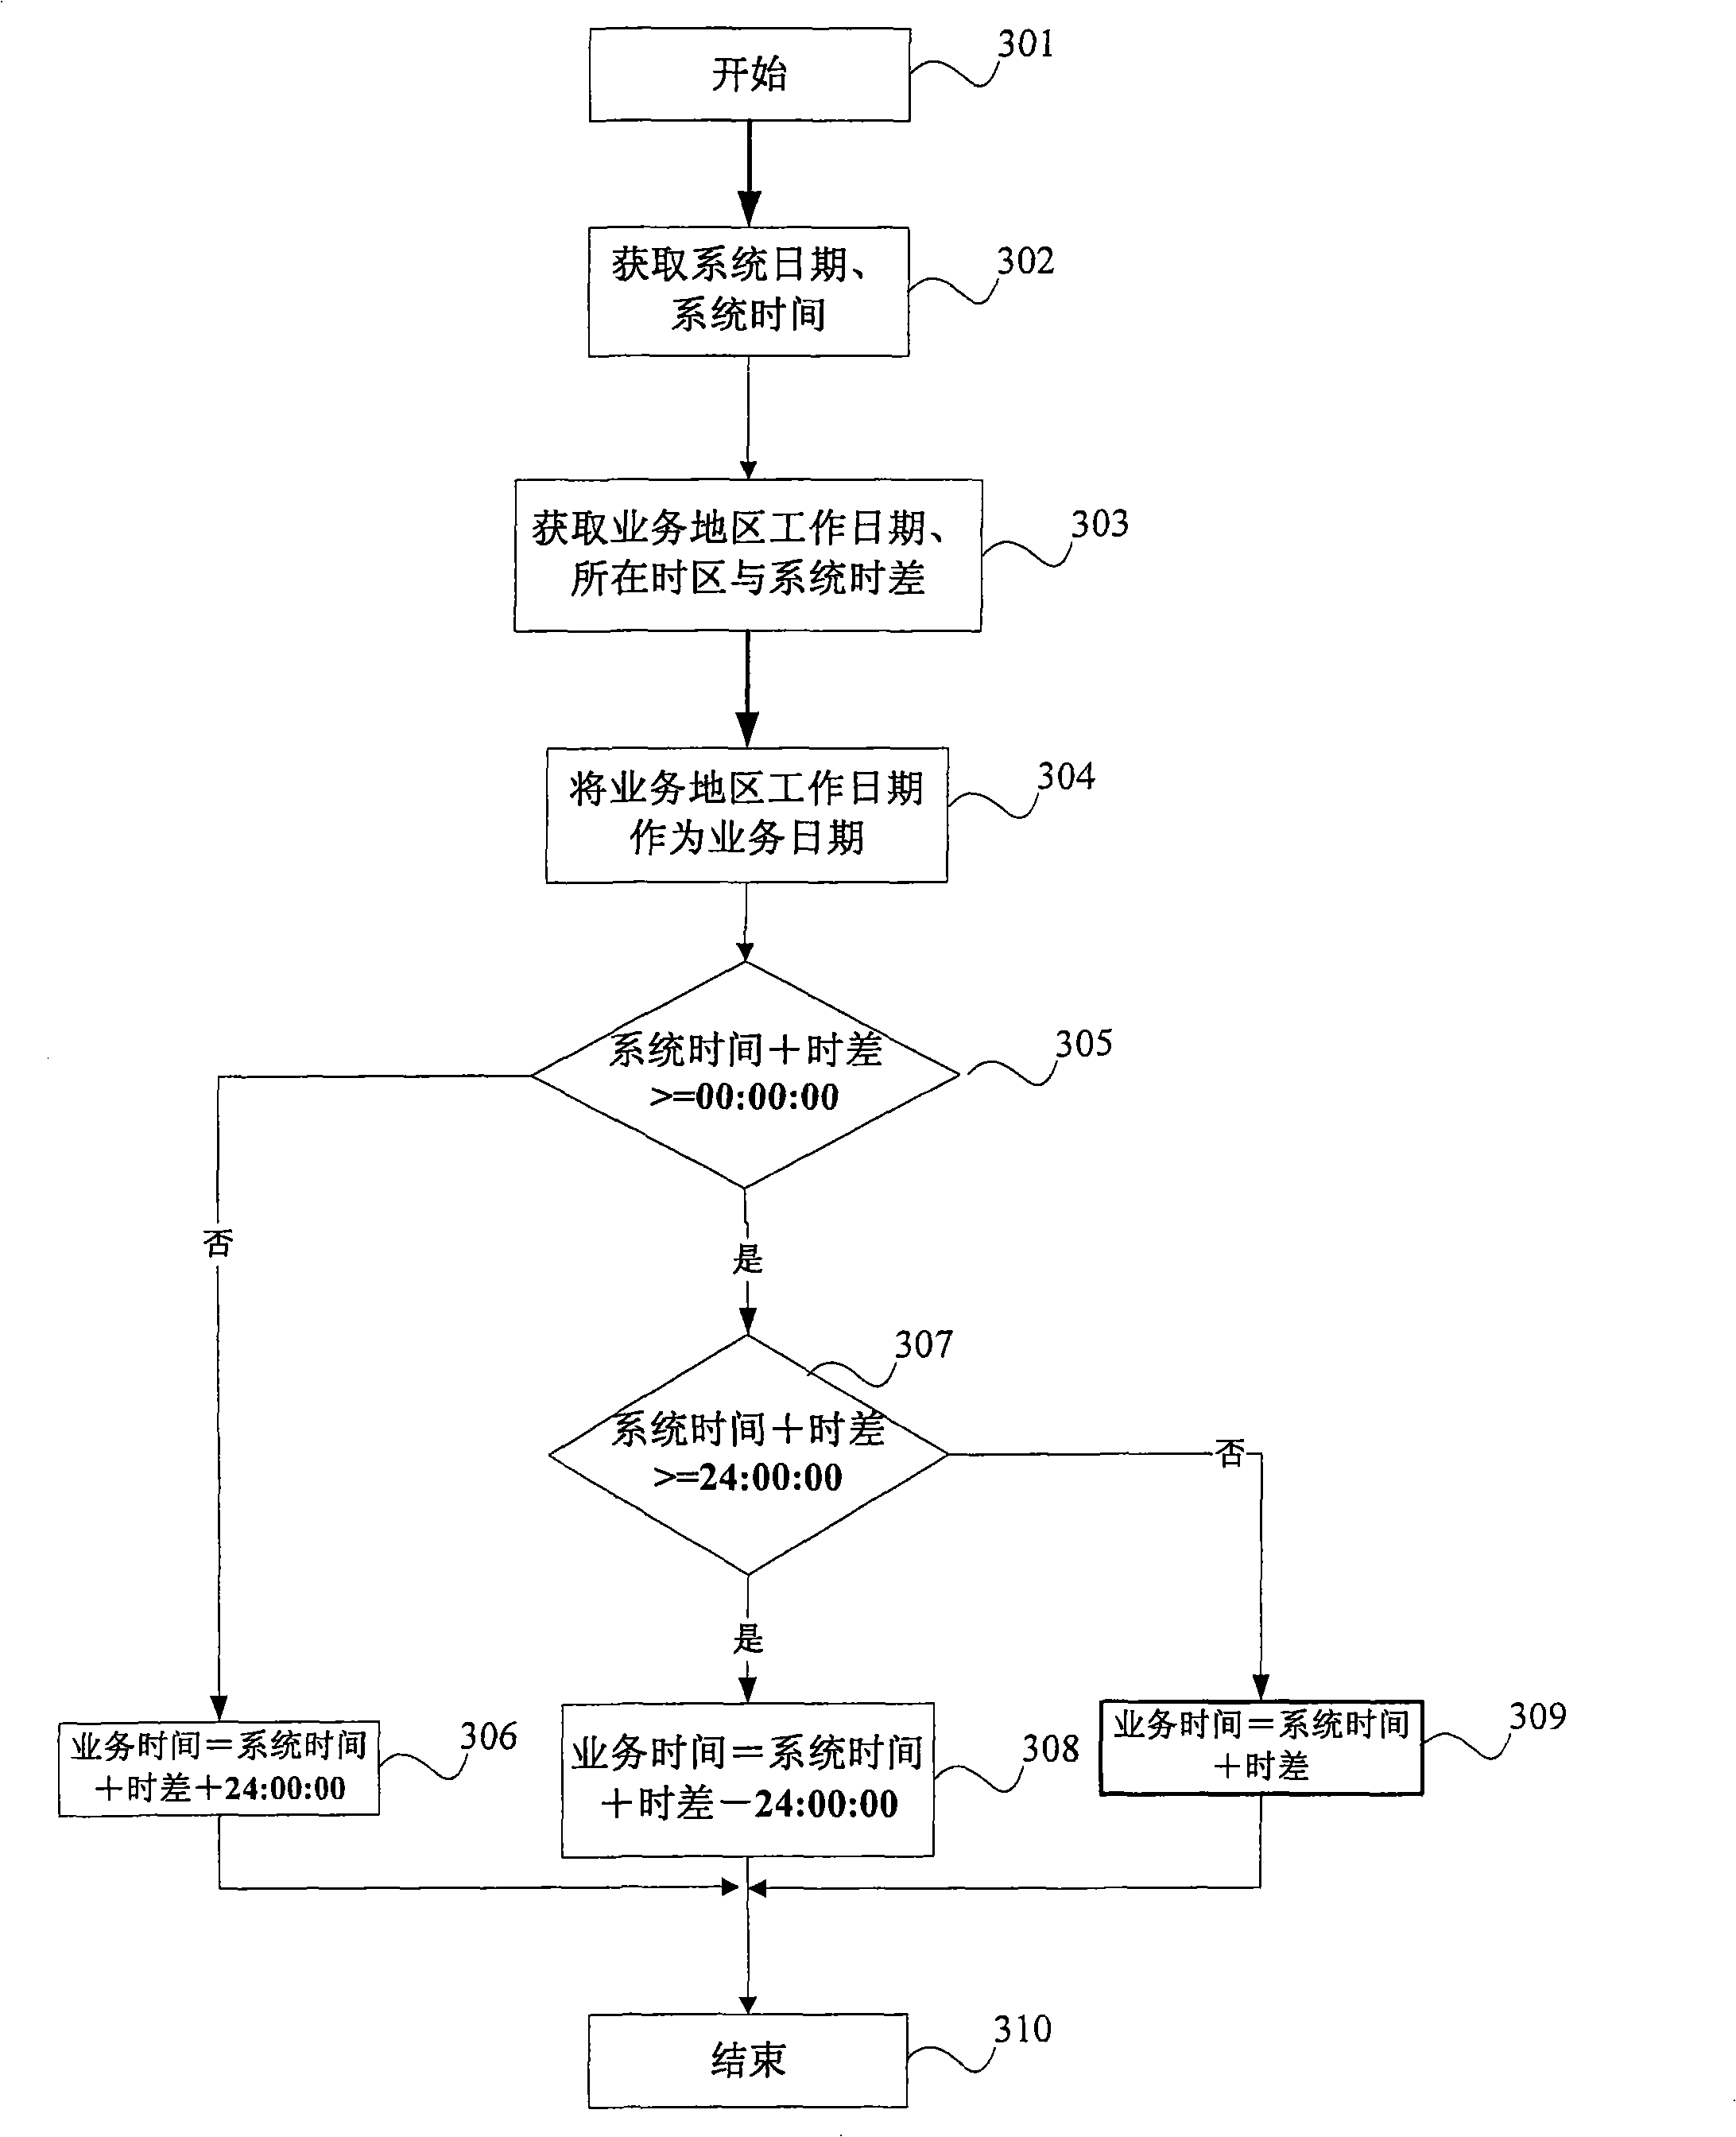 Processing system and method for implementing multiple time zone continuous service